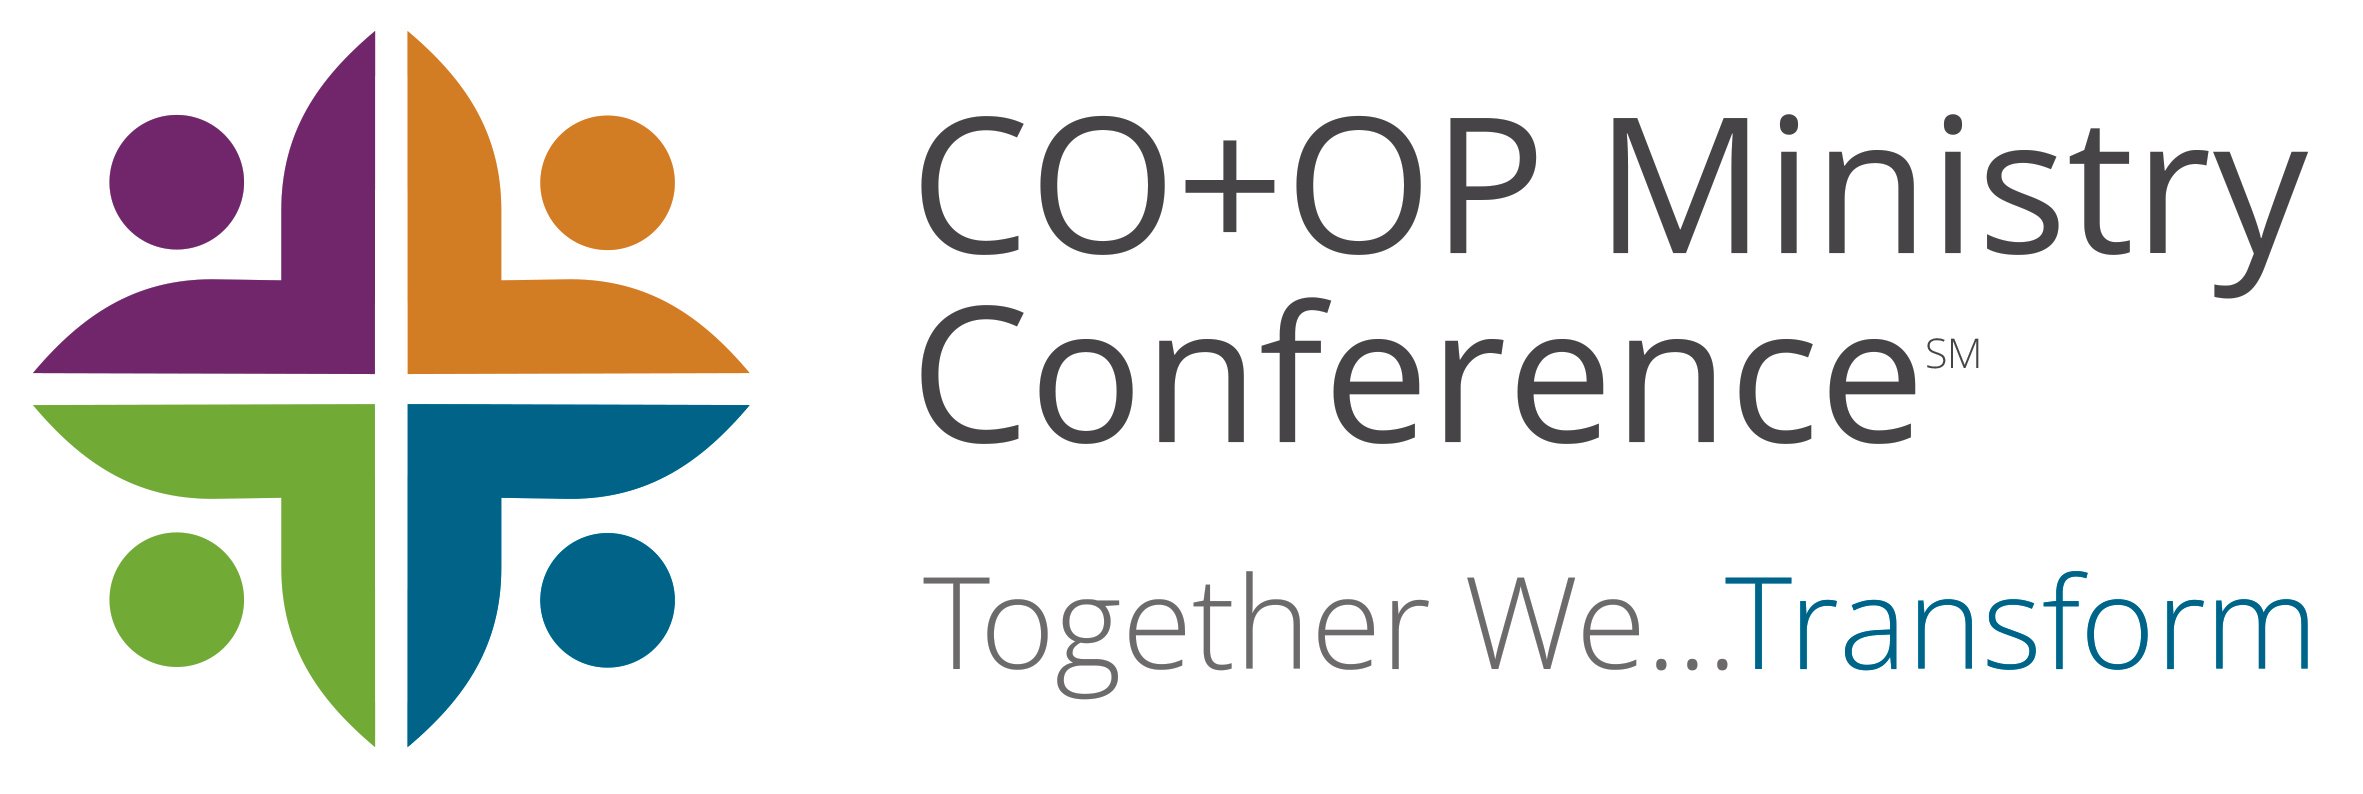 CO+OP Ministry Conference